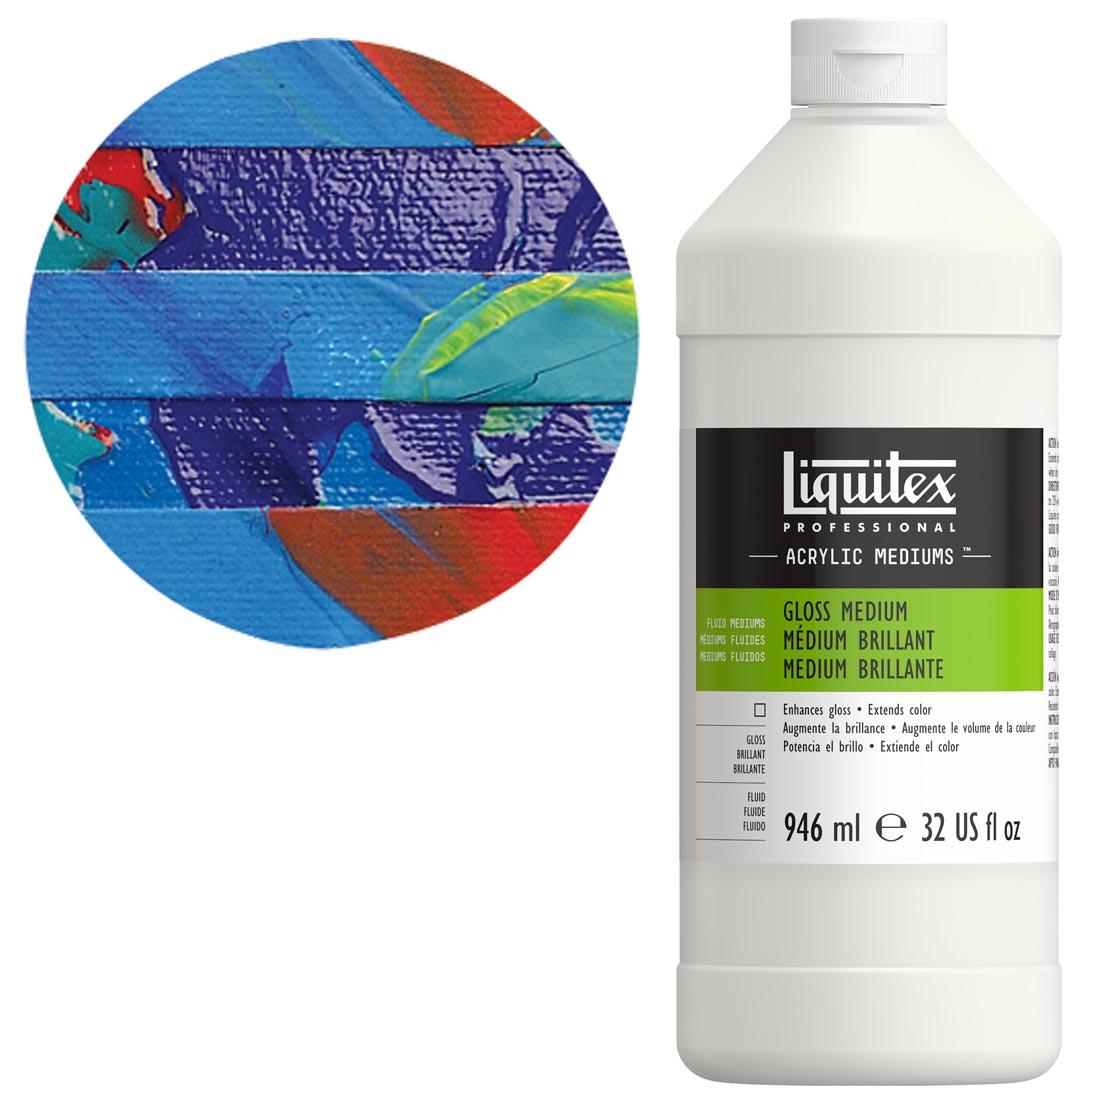 bottle of Liquitex Gloss Medium, quart, with sample swatch in the background